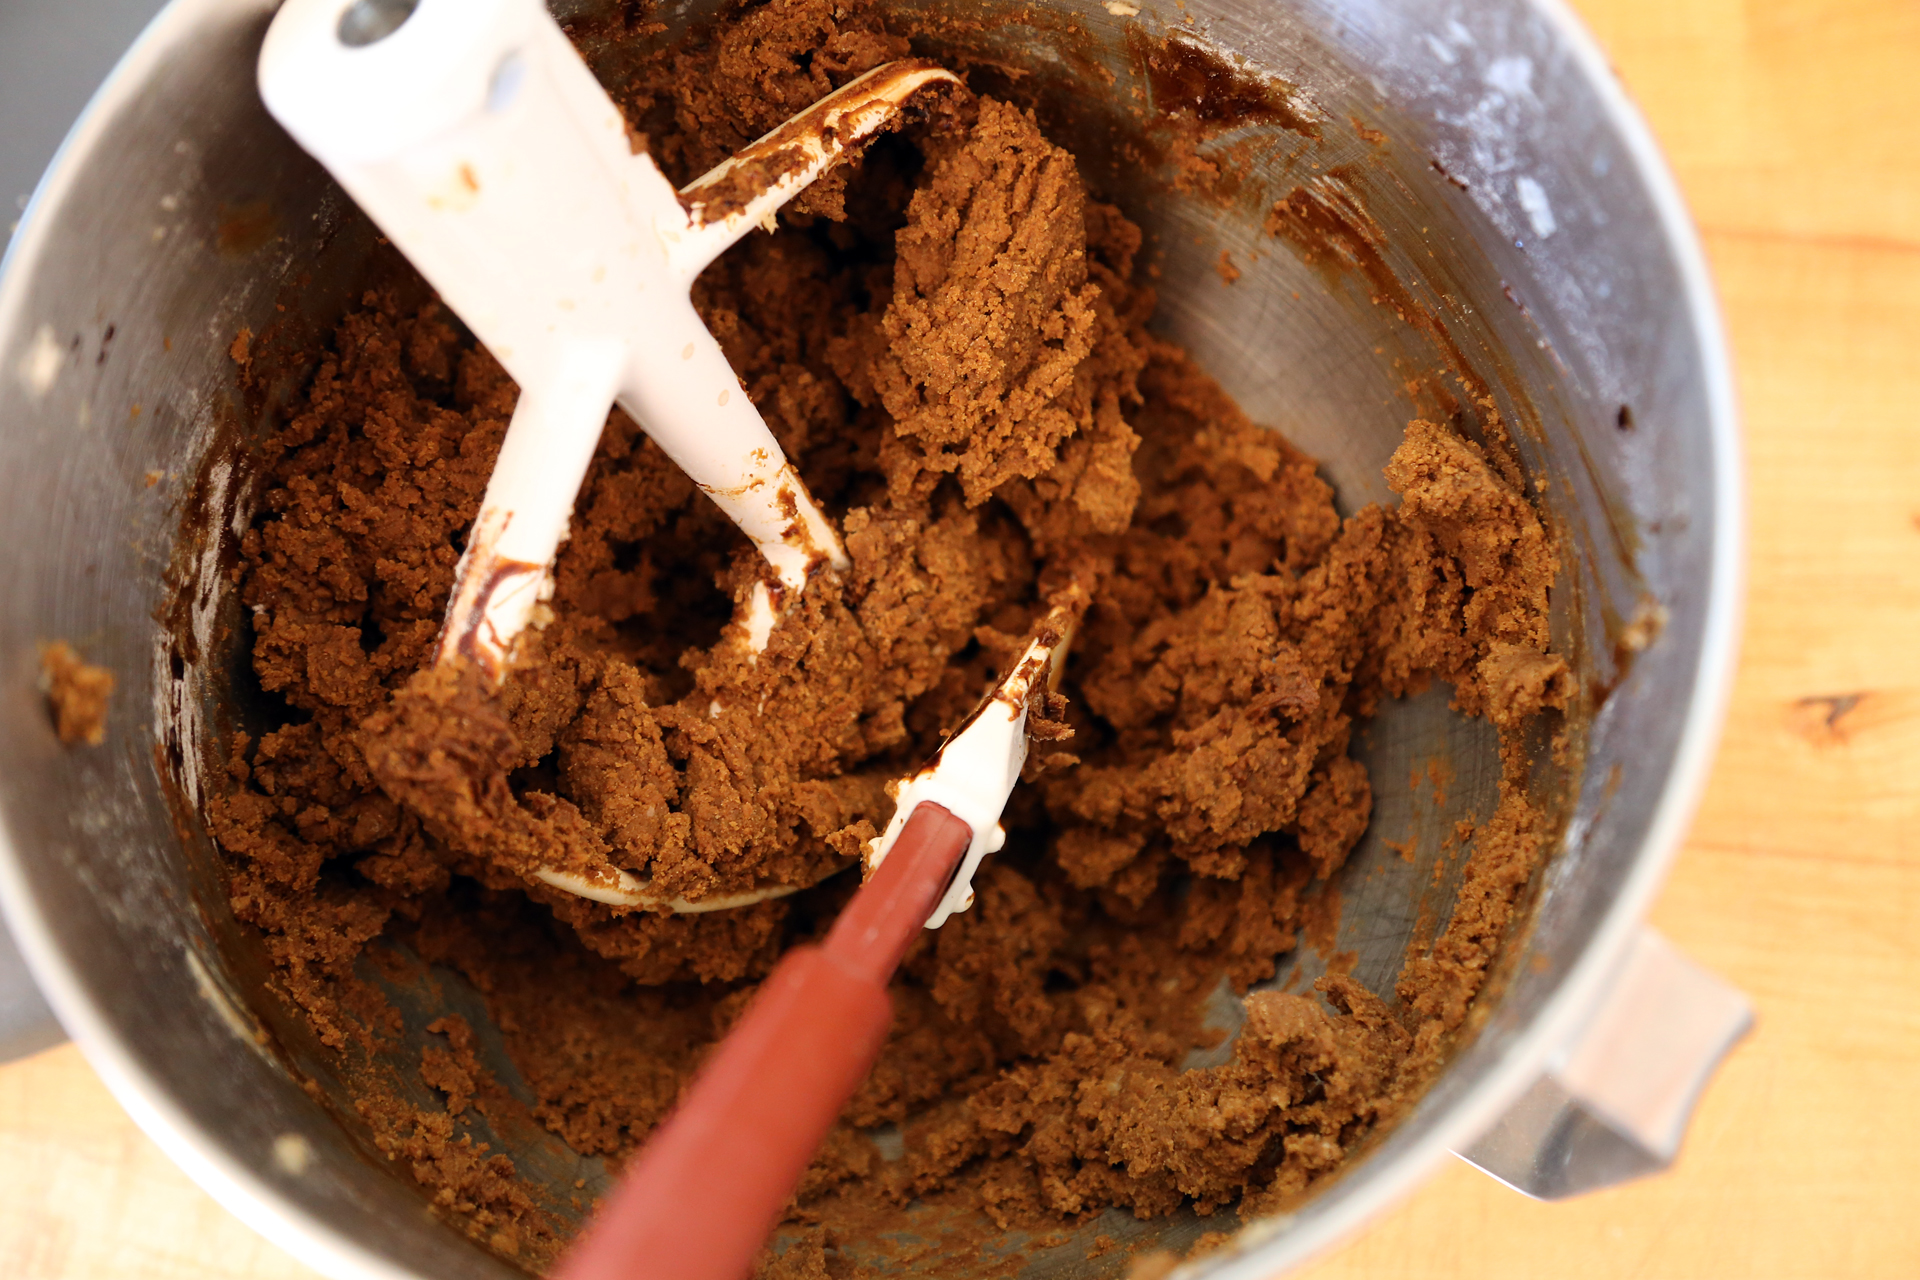 The combined gingerbread dough.